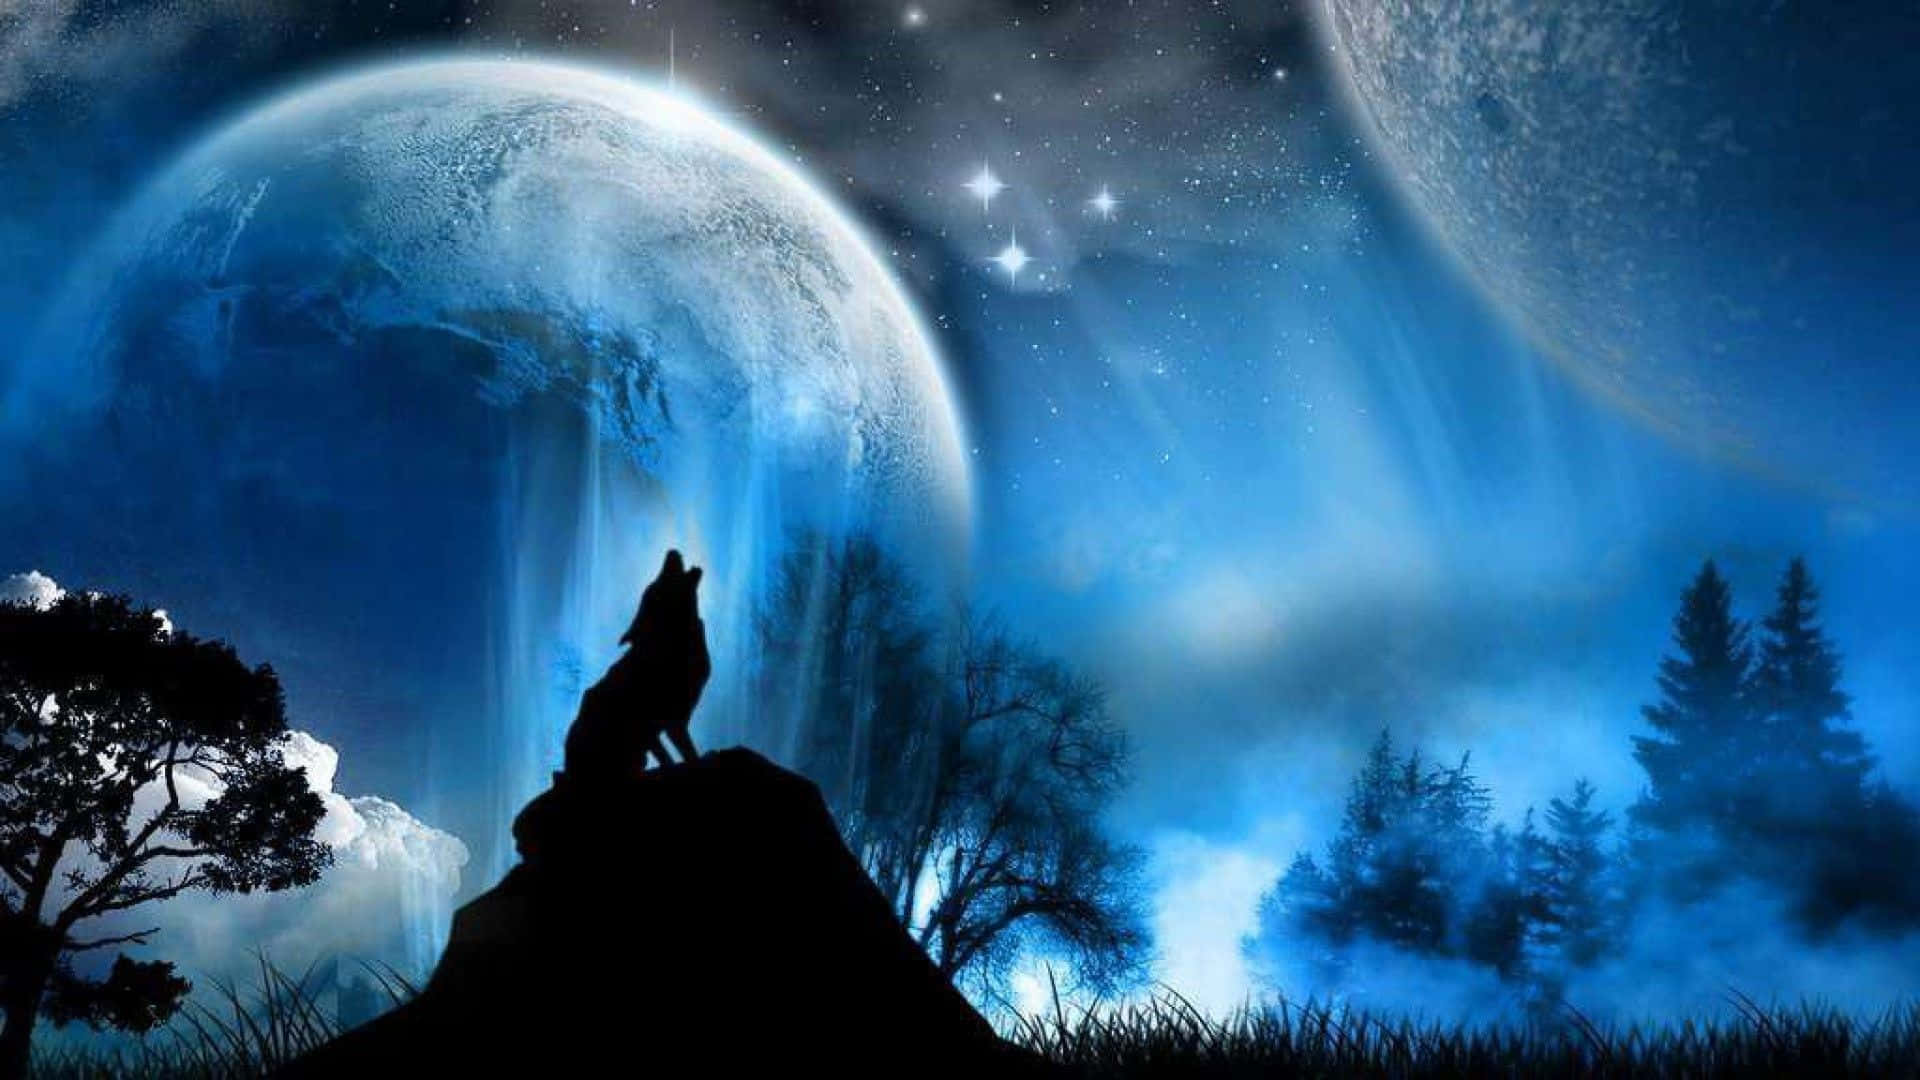 Howling Epic Wolves Silhouette Wallpaper